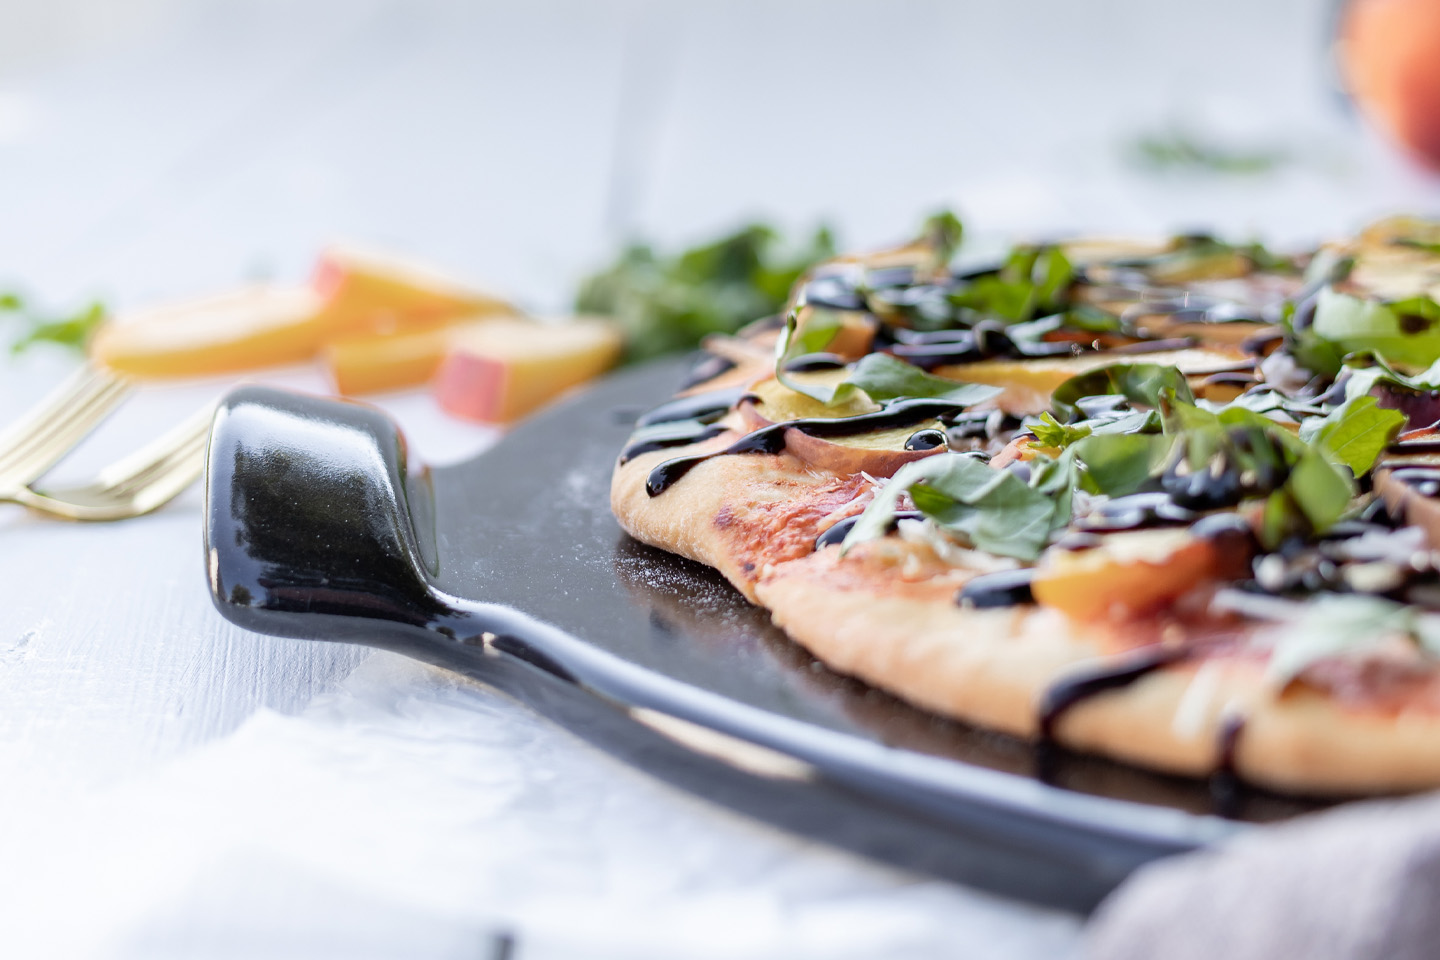 If you're still trying to hang on to those fresh summer flavours, but are also in the mood for pizza (who isn't?) try this surprisingly elegant and fresh-tasting plant-based peach basil pizza!